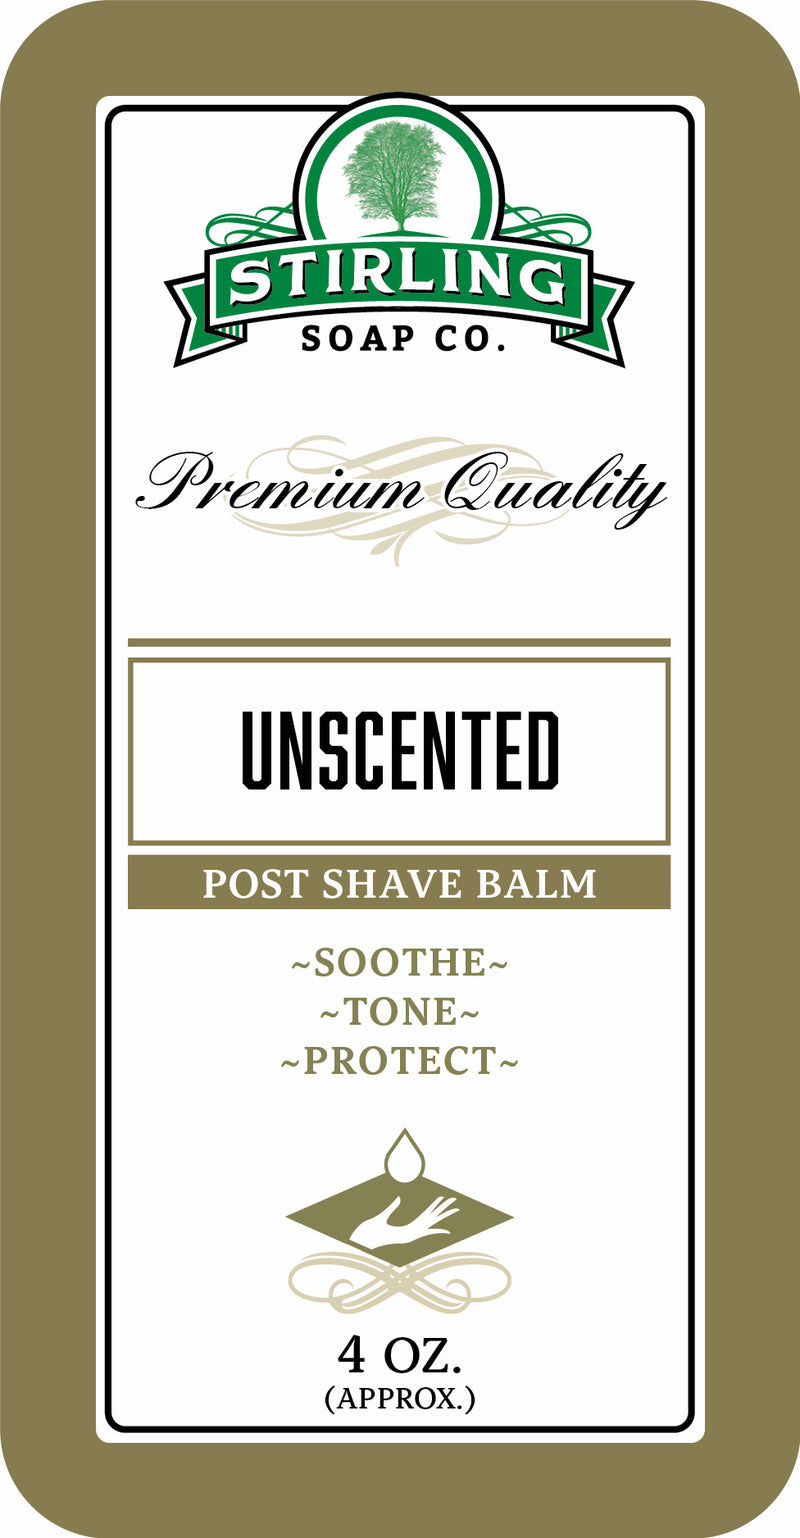 Unscented - Post-Shave Balm